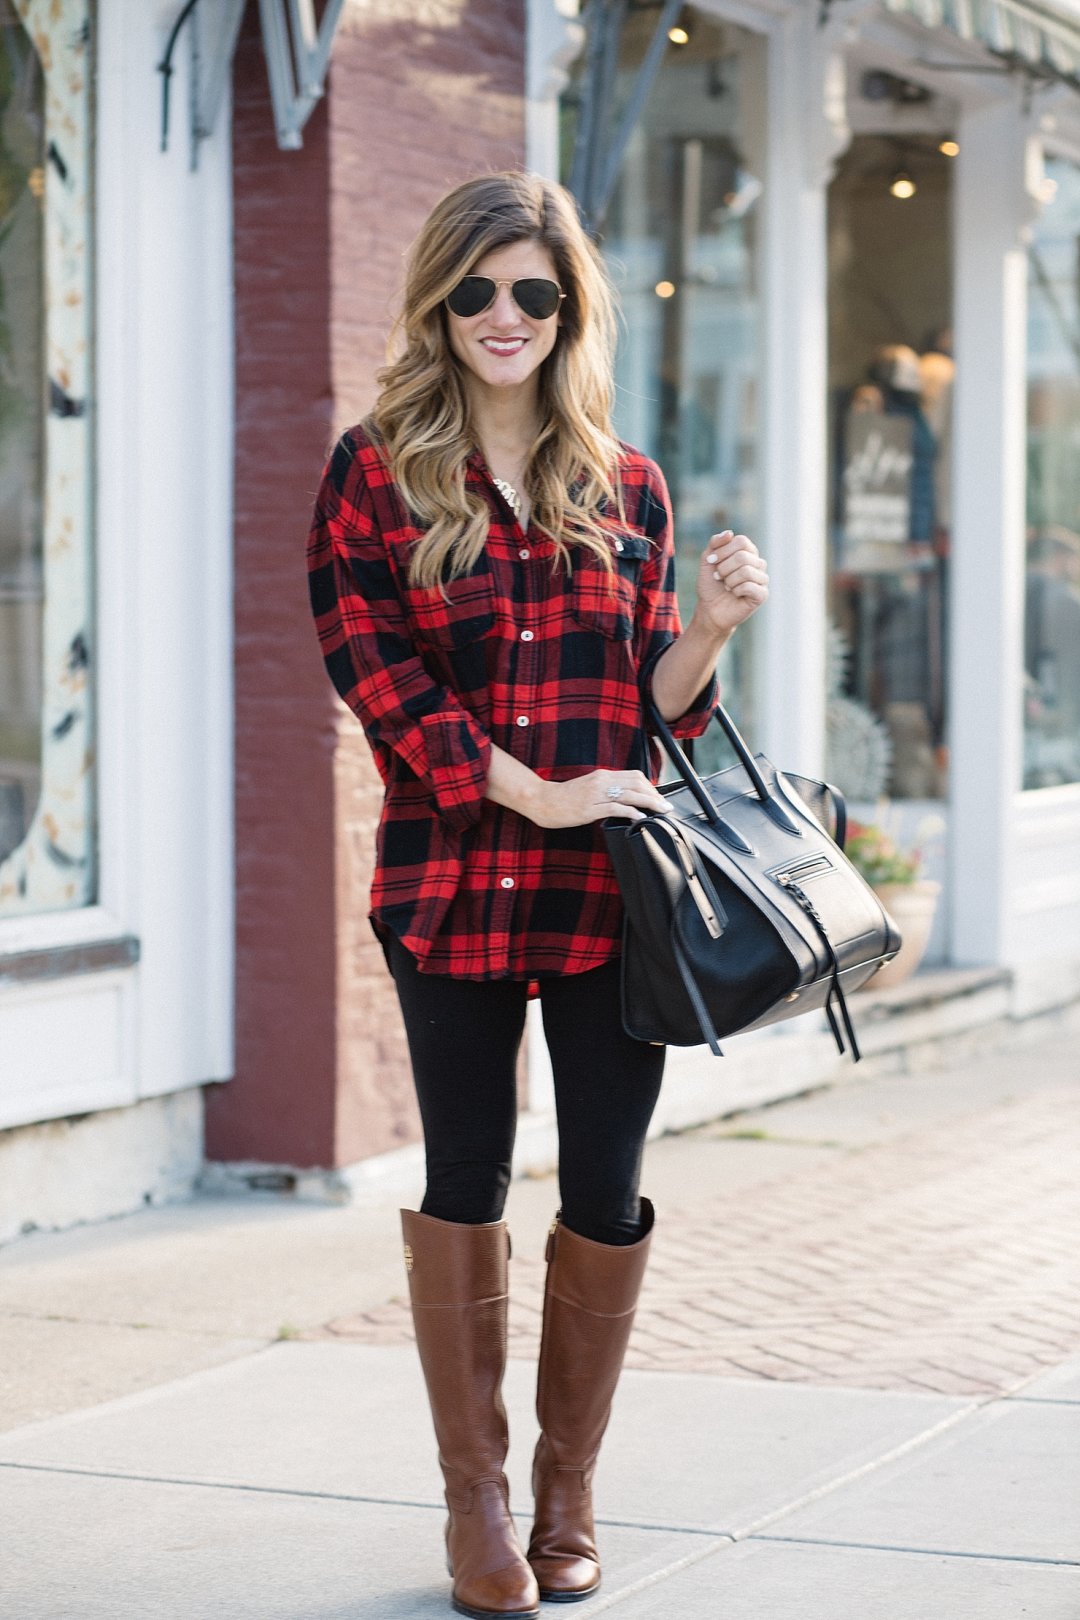 TUNICS TO WEAR WITH LEGGINGS THIS FALL